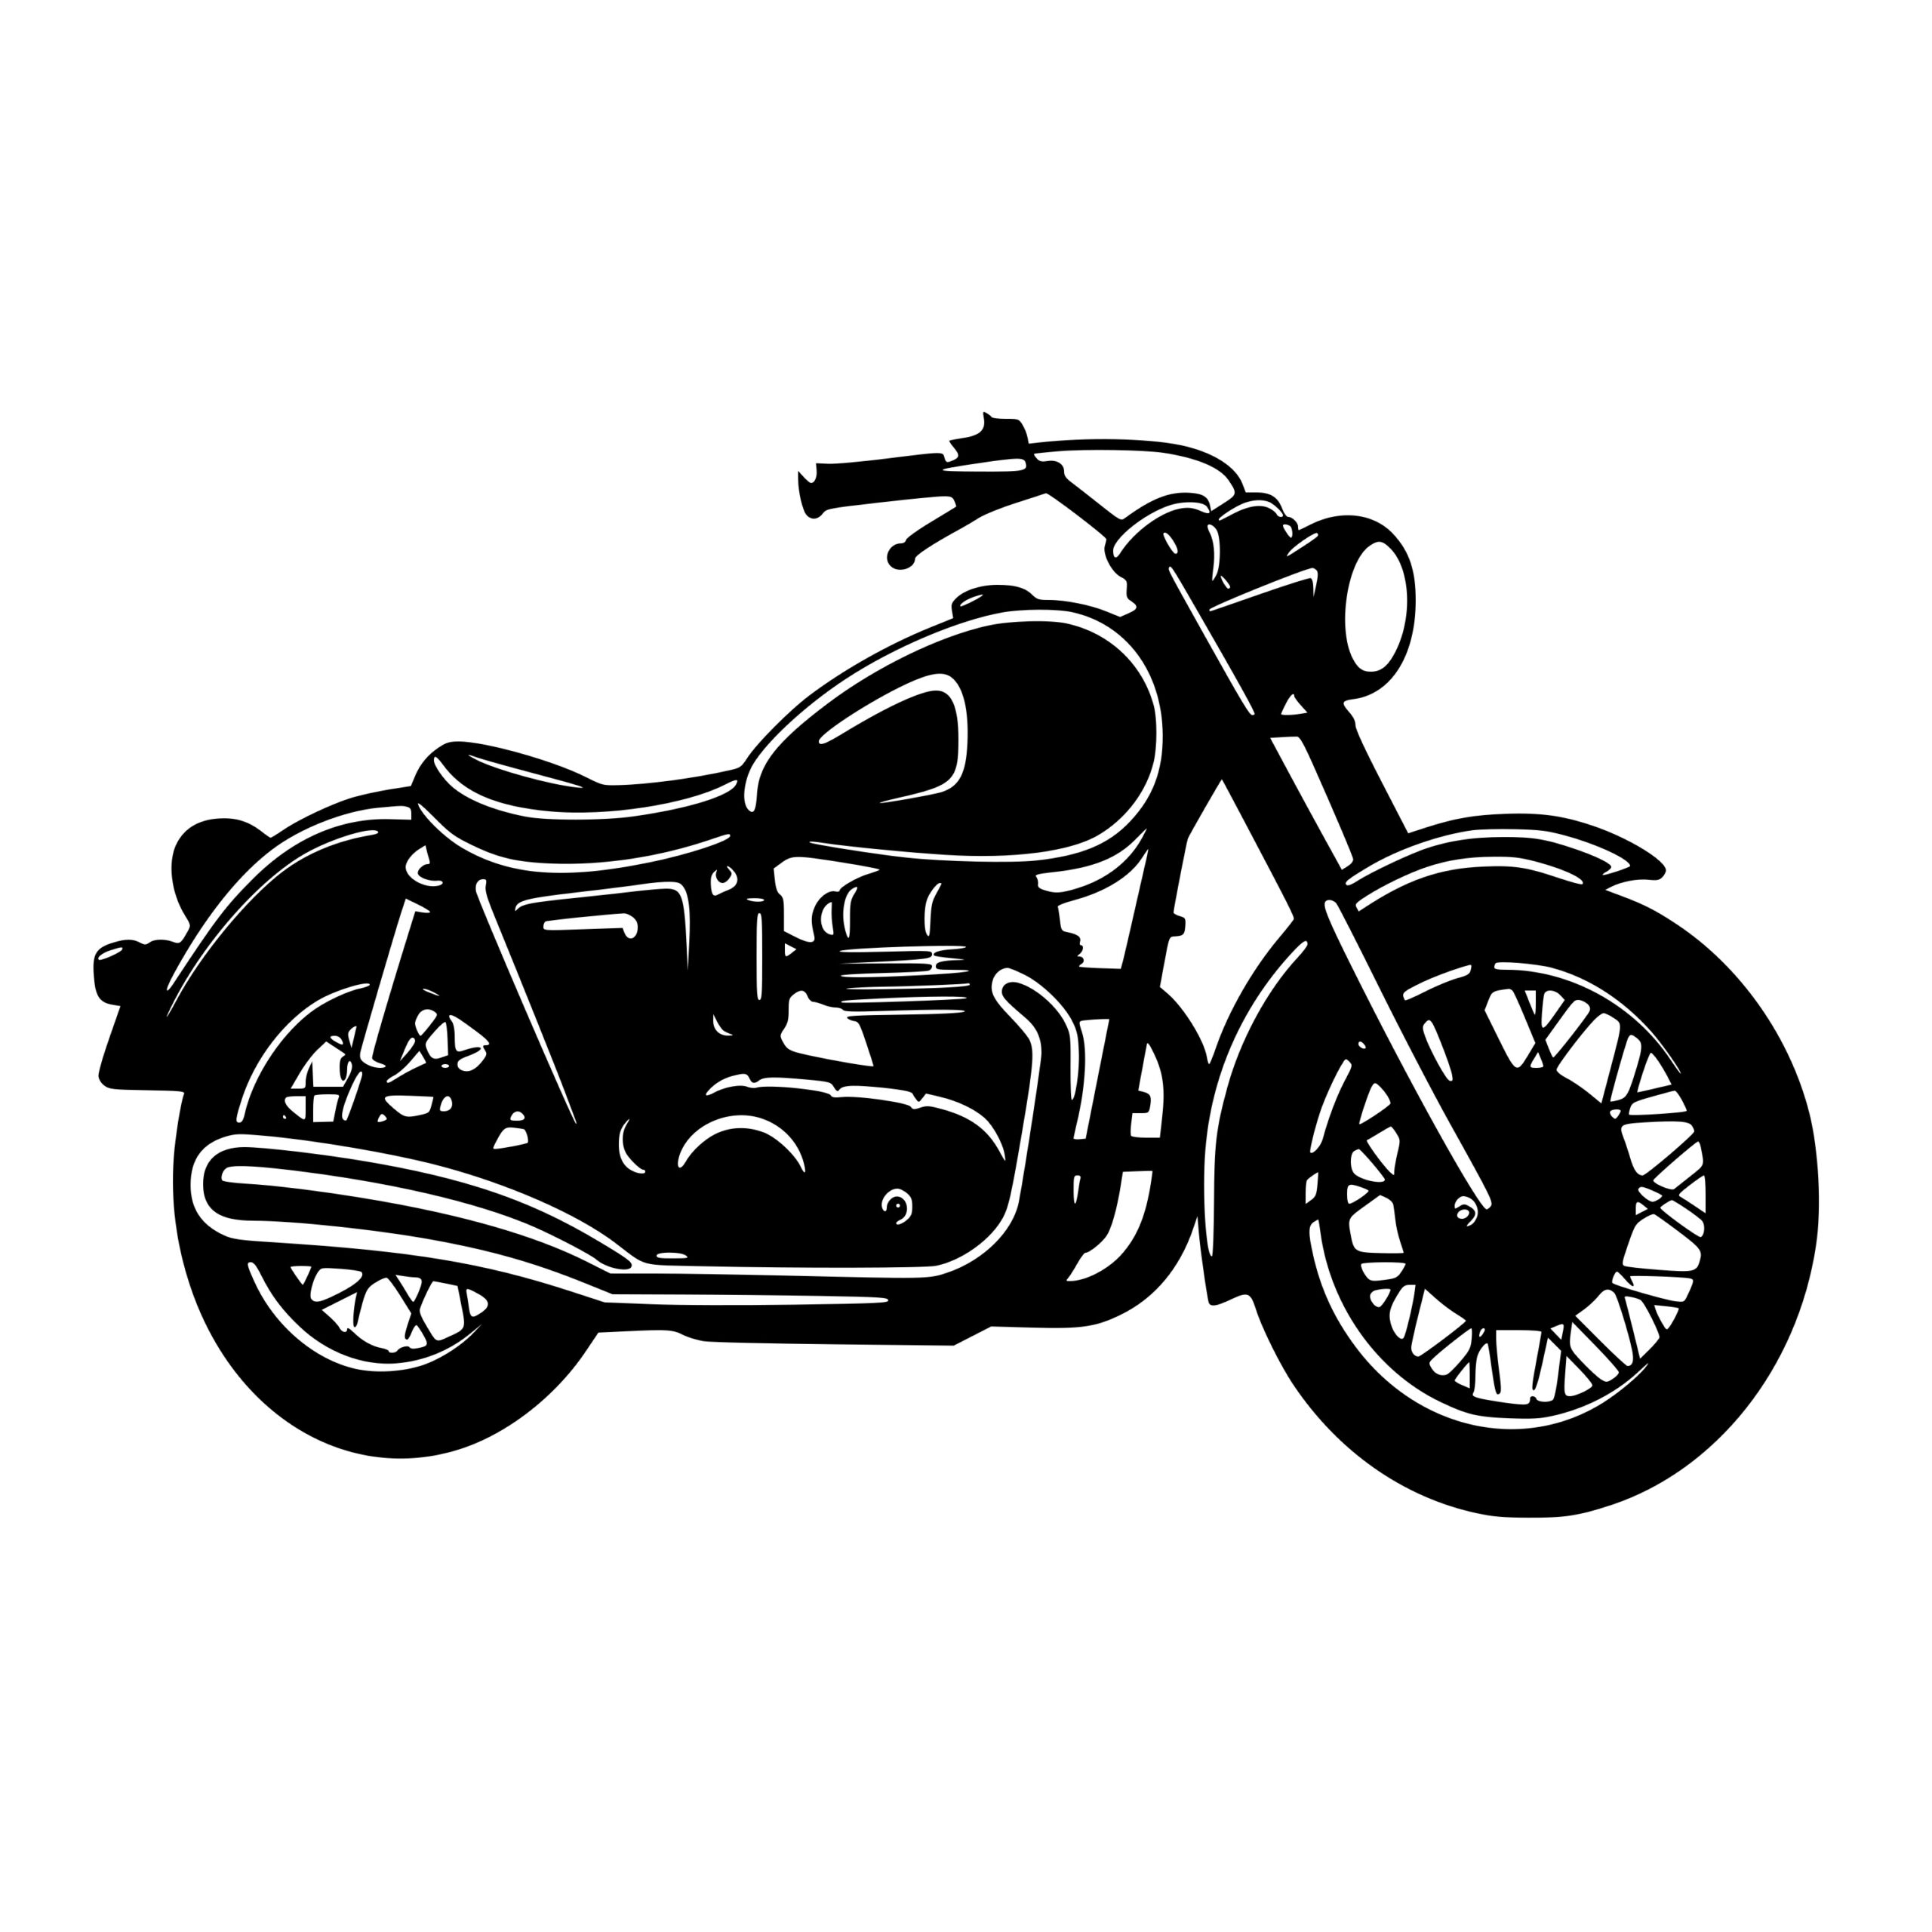 Classic Motorcycle SVG File for Cricut, Silhouette, Laser Machines